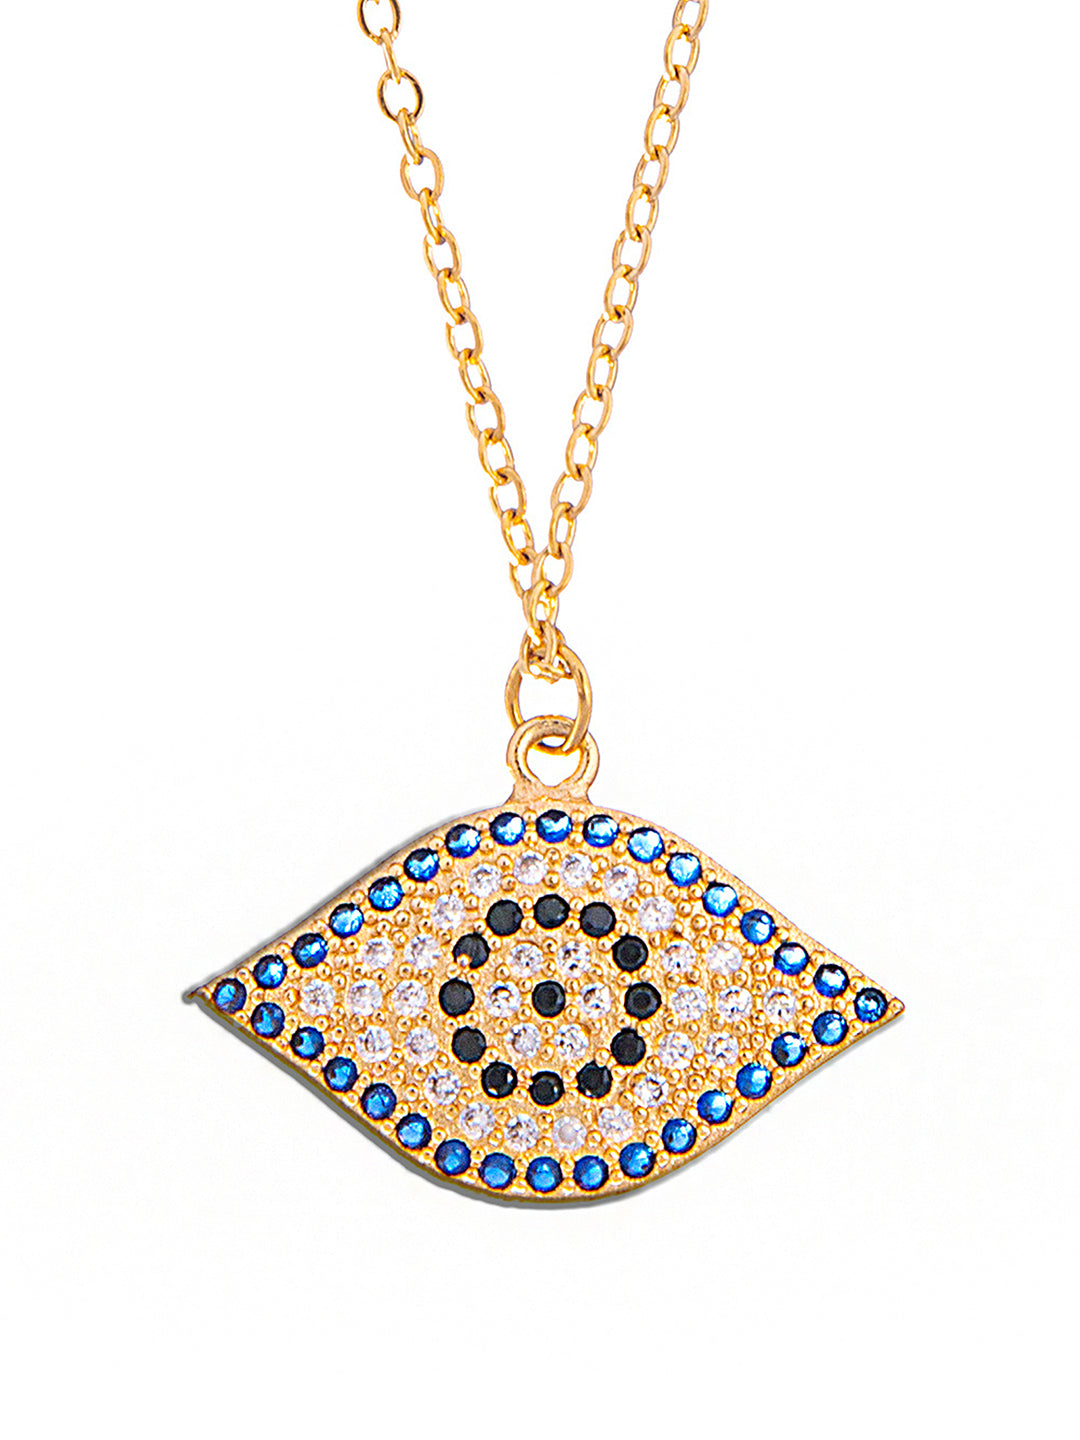 Gold Plated CZ Studded American Diamond Evil Eye Necklace For Girls, Teens & Women (MD_2101) - Shining Jewel